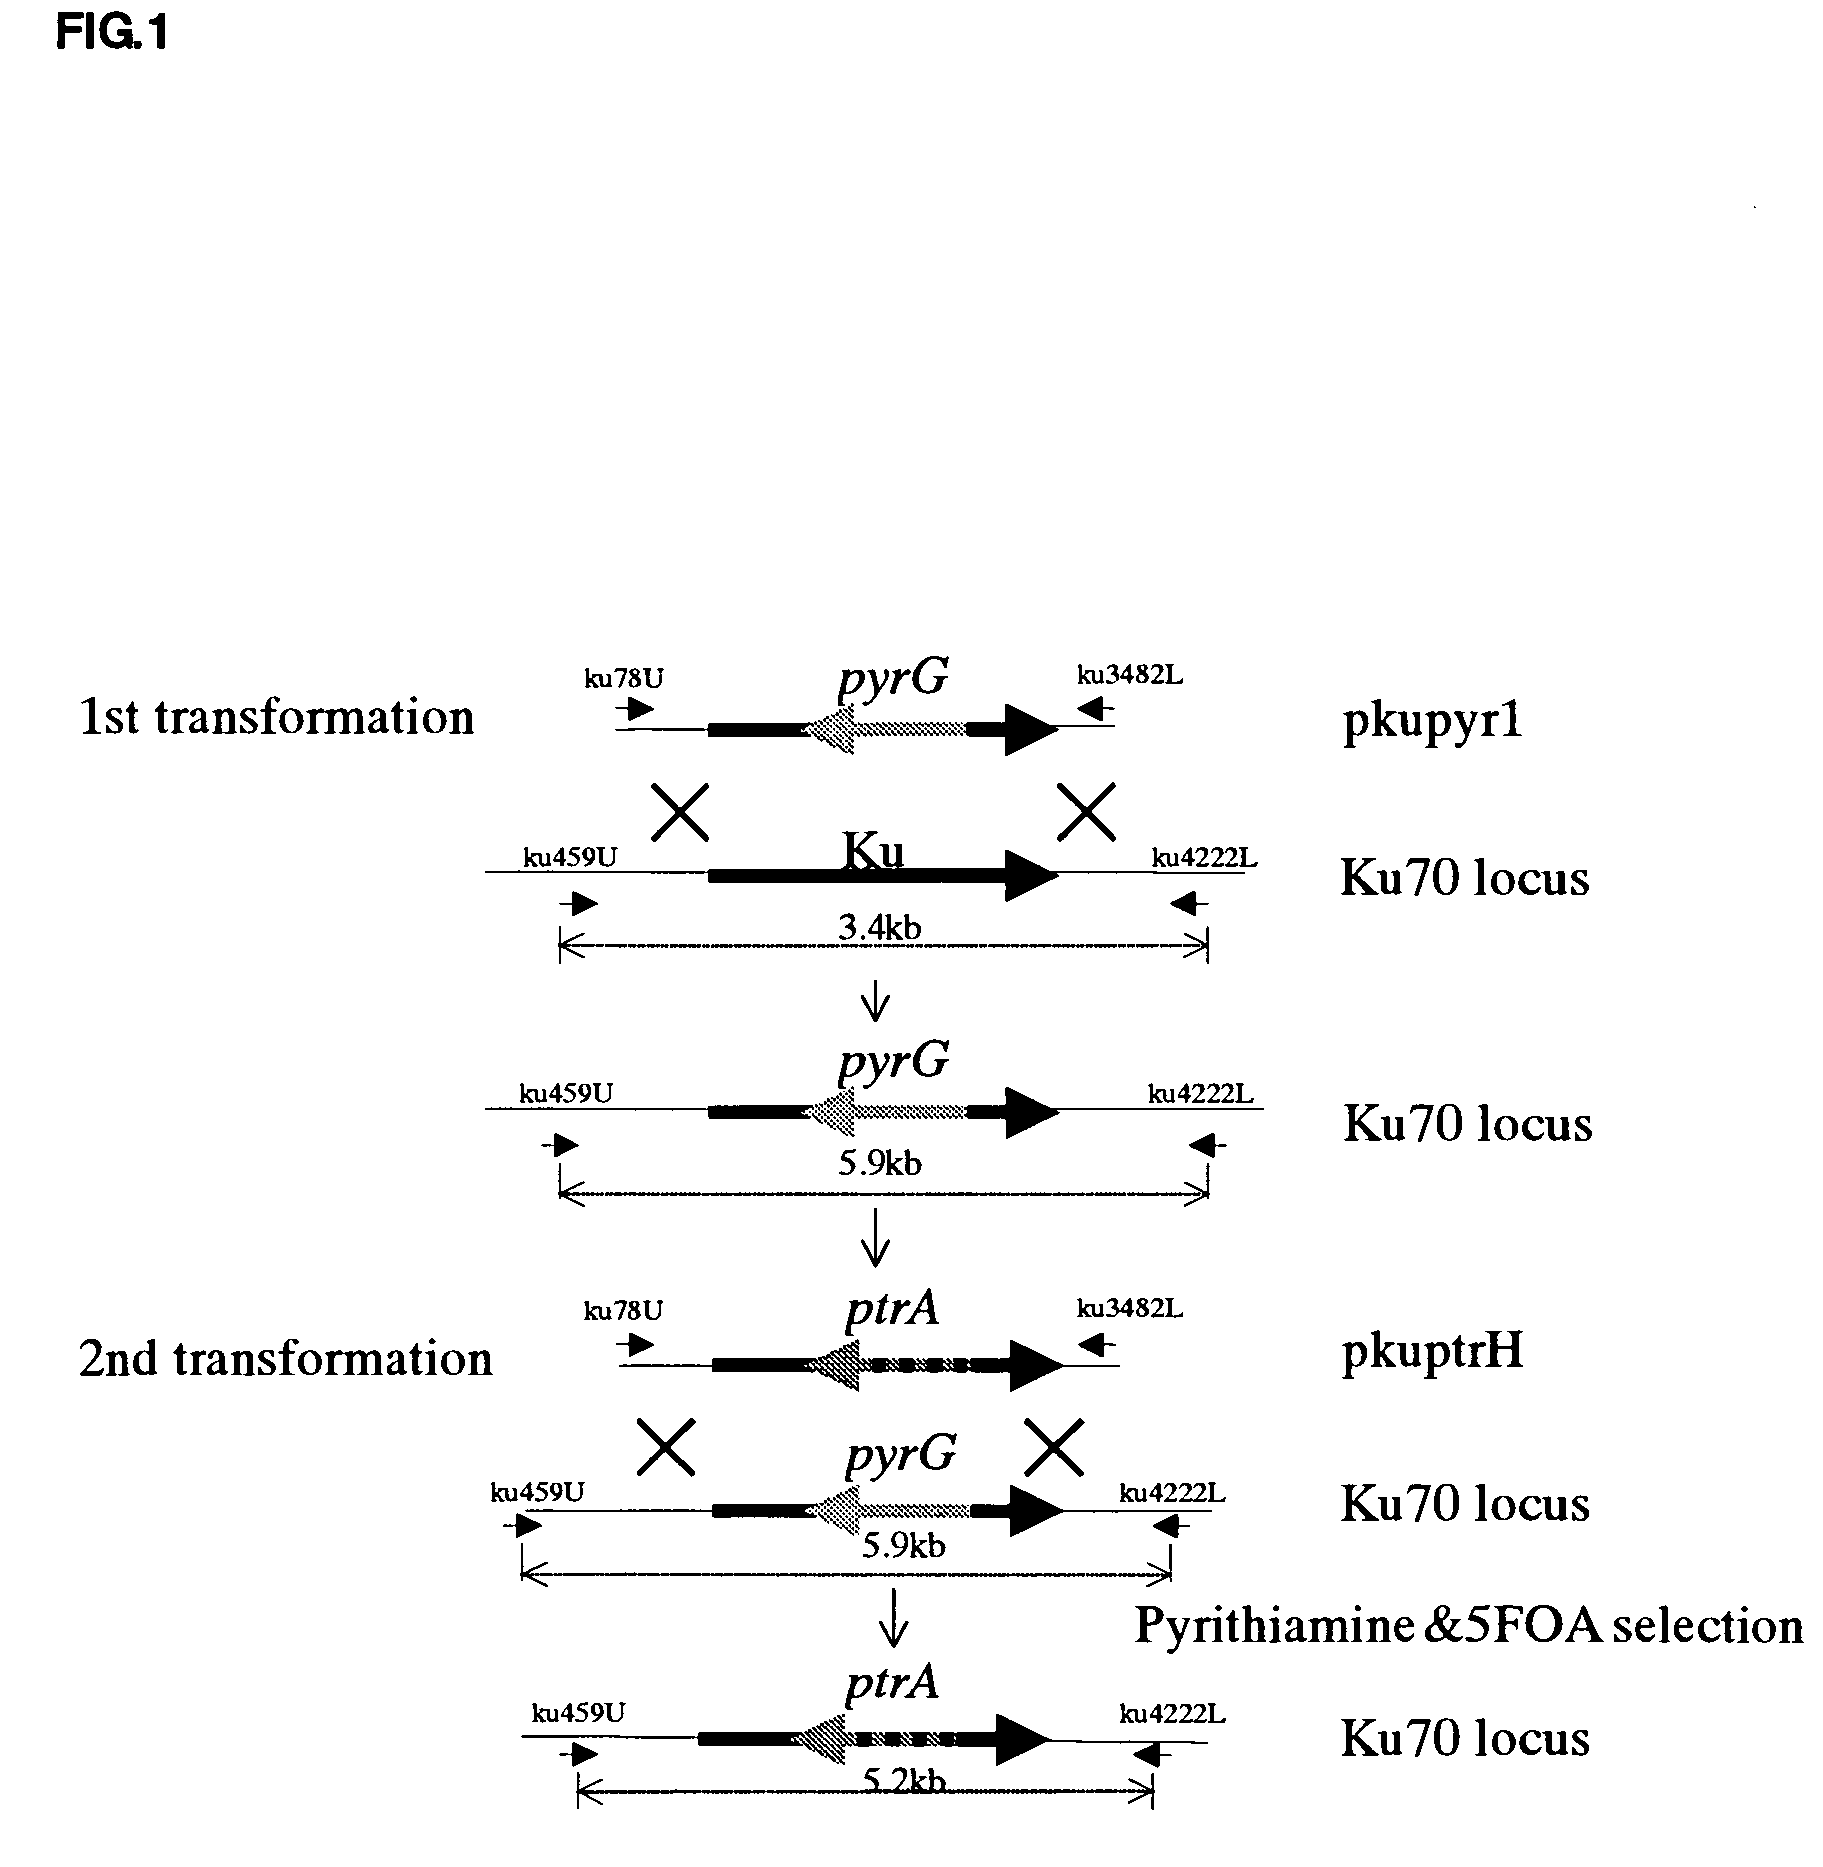 Transformant having an increased frequency of homologous recombination